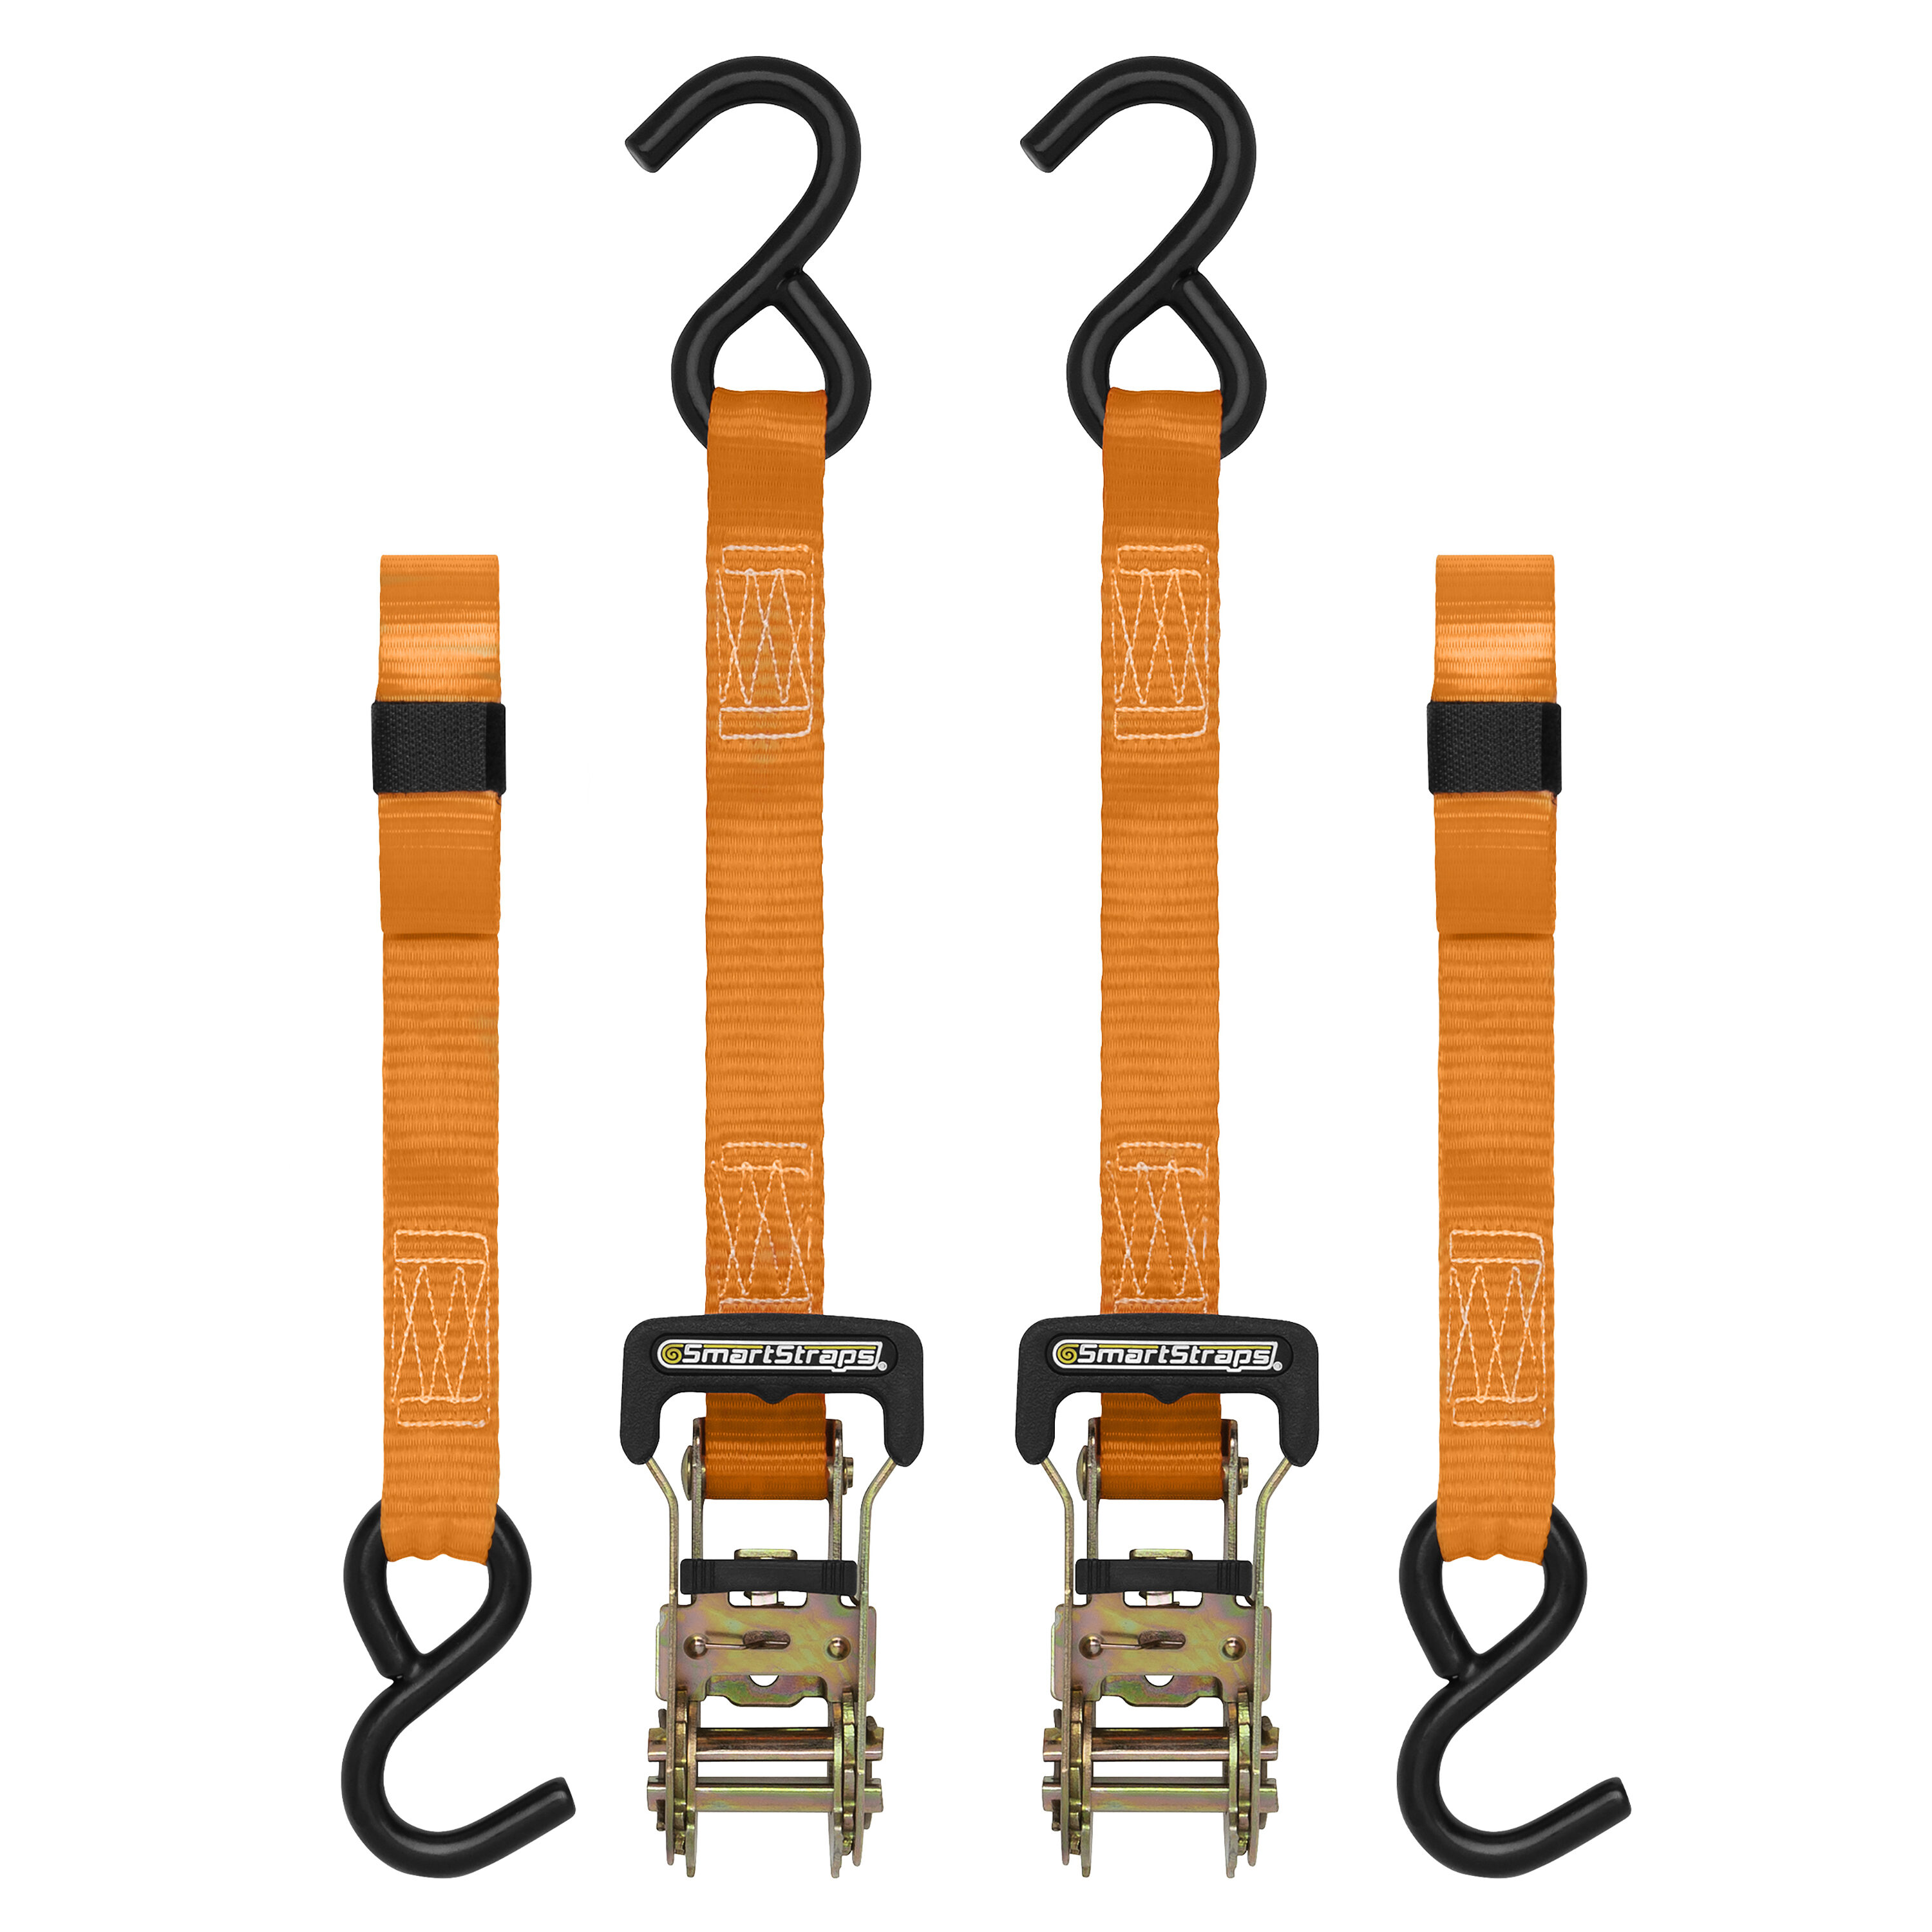 Boat Trailer Tie-Down Straps - Pack of 2 - Weather-Resistant Nylon